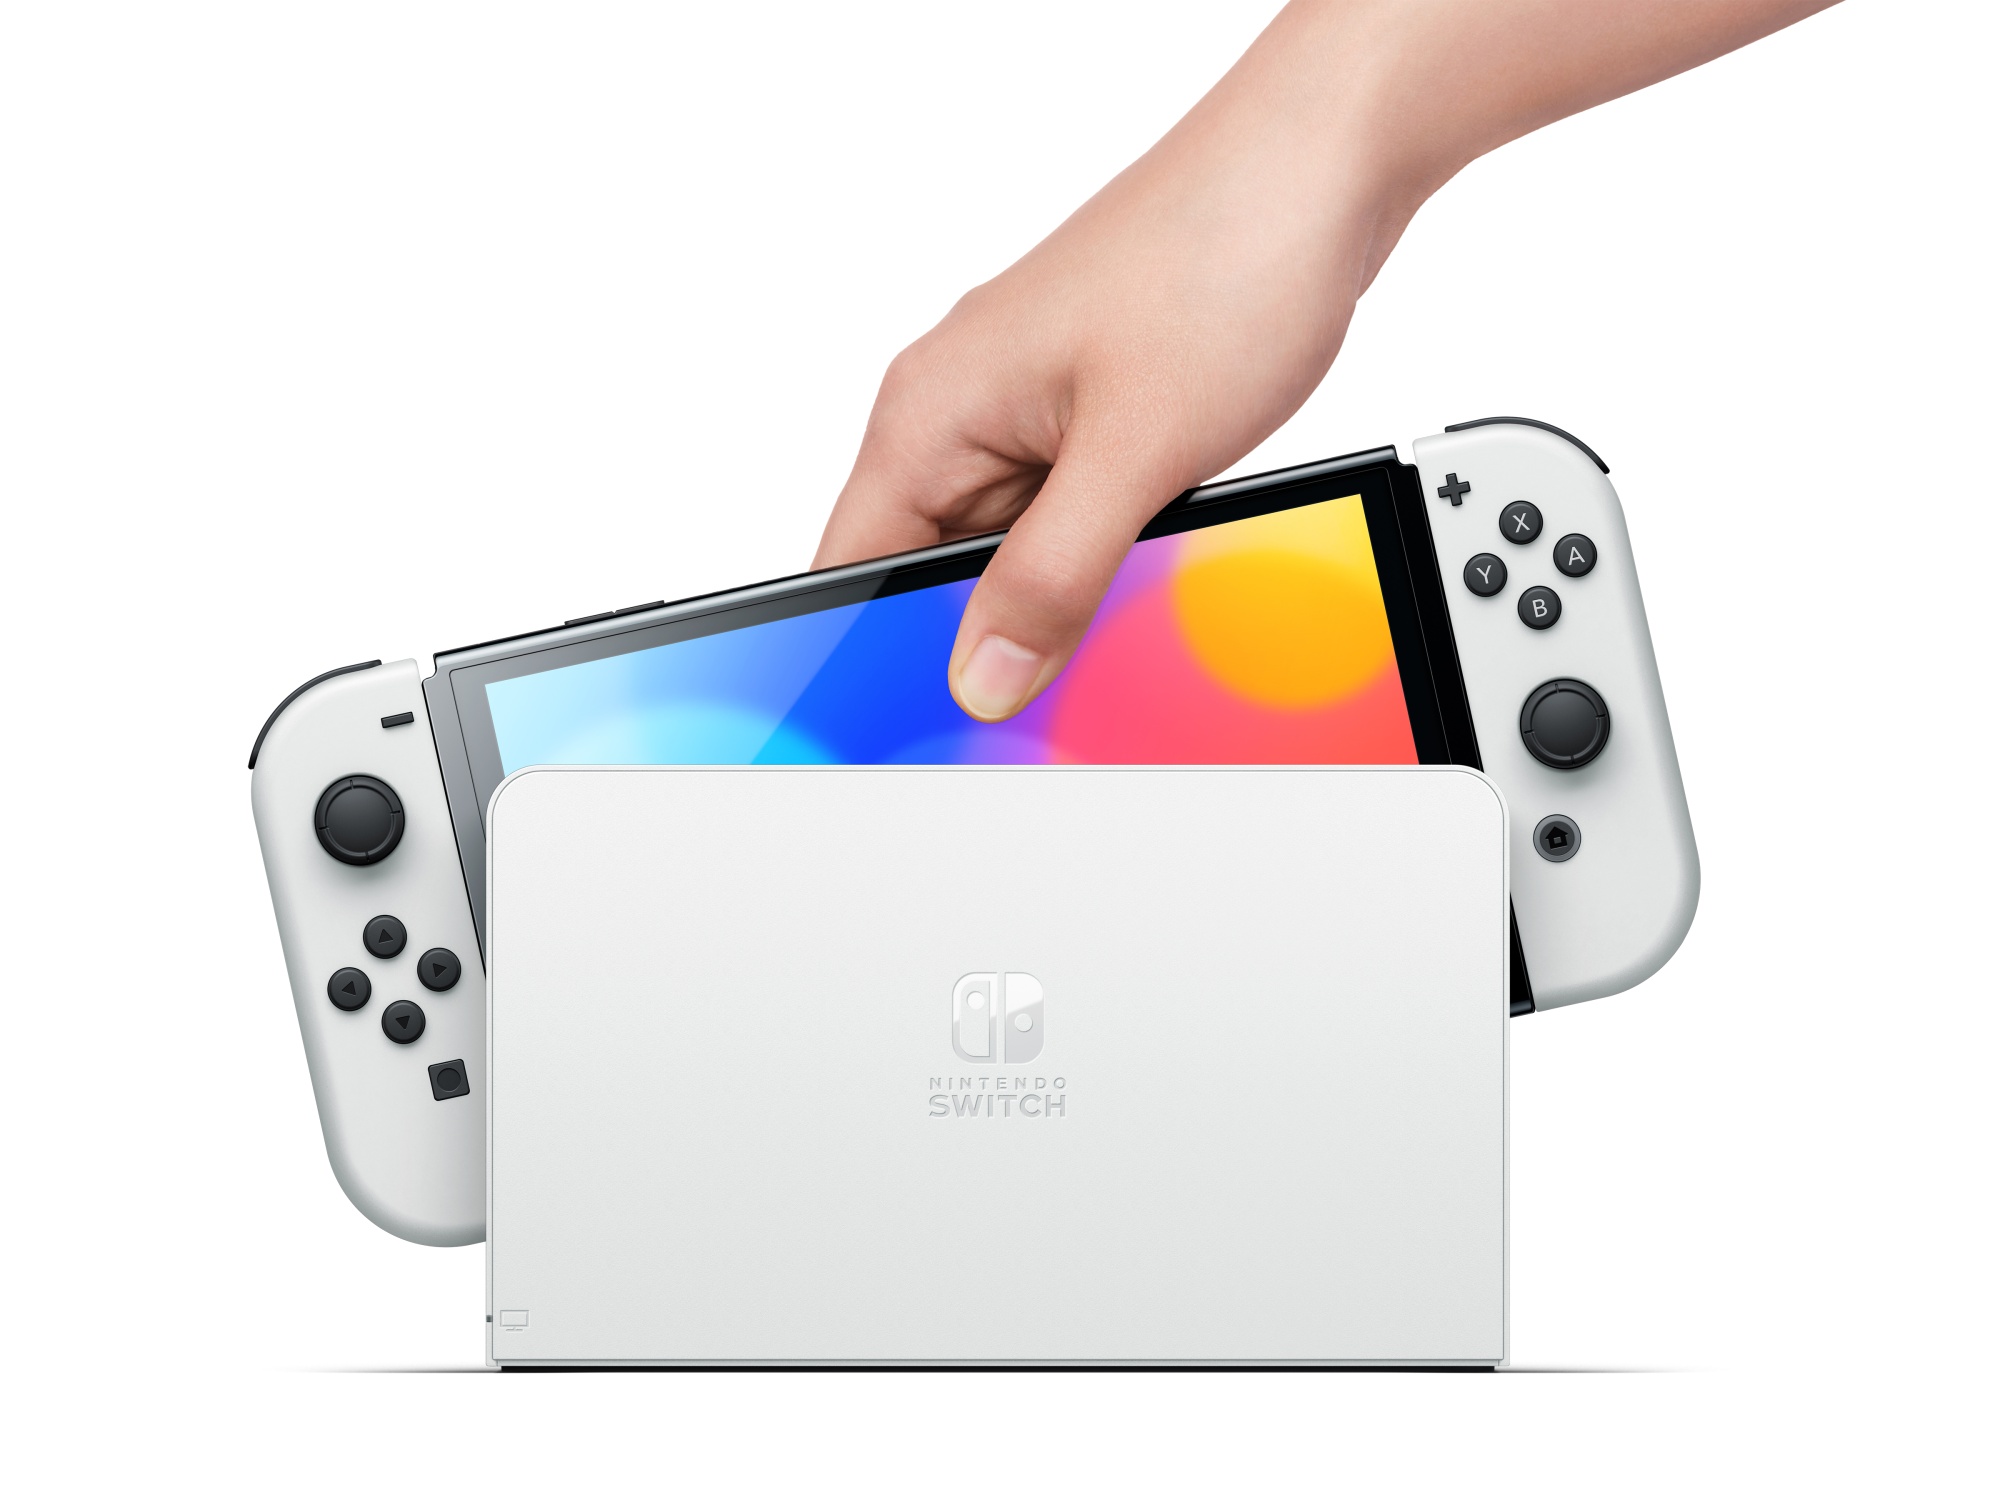 Nintendo Switch OLED model announced! 🎮 October 8th retail price